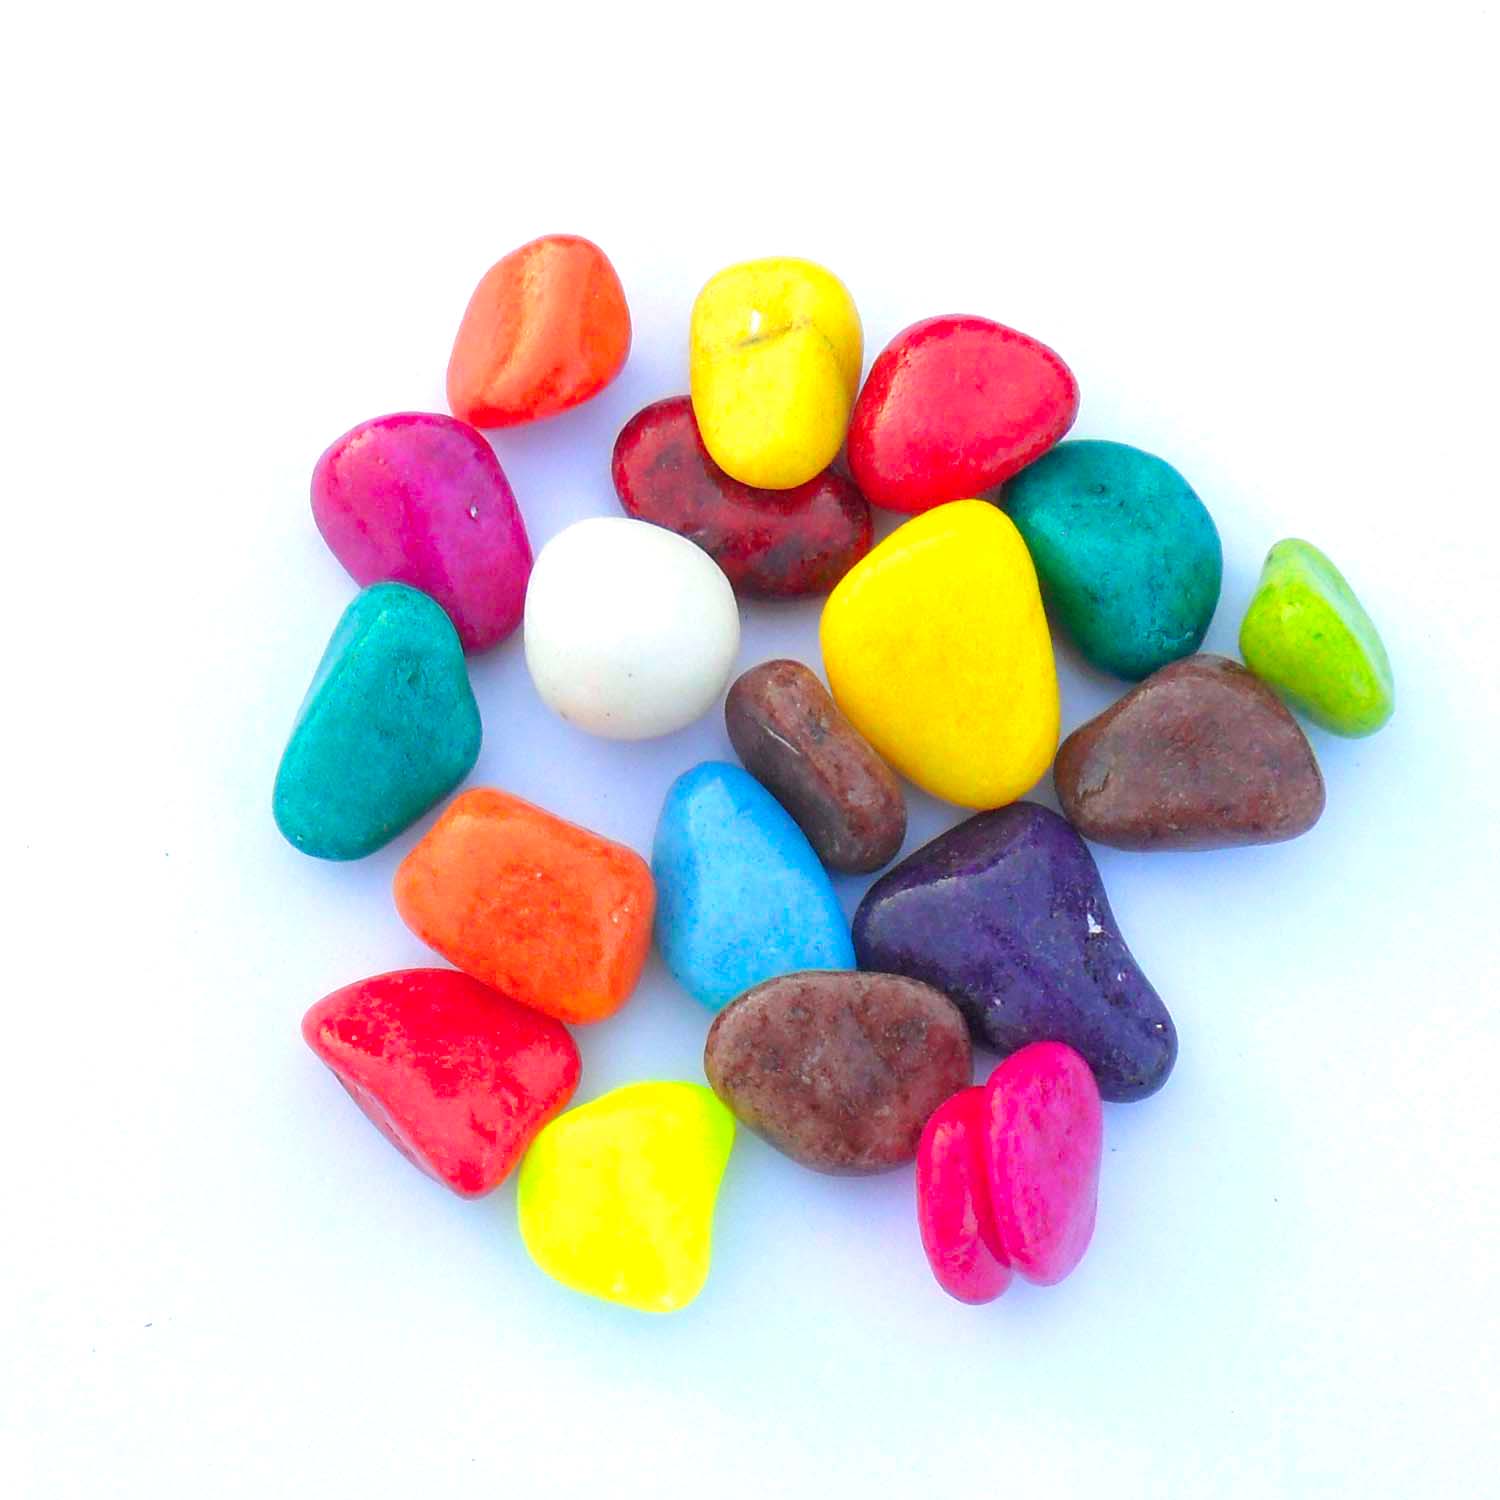 Buy Multicolour Glass Pebbles For Decoration Online ₹199 From Shopclues